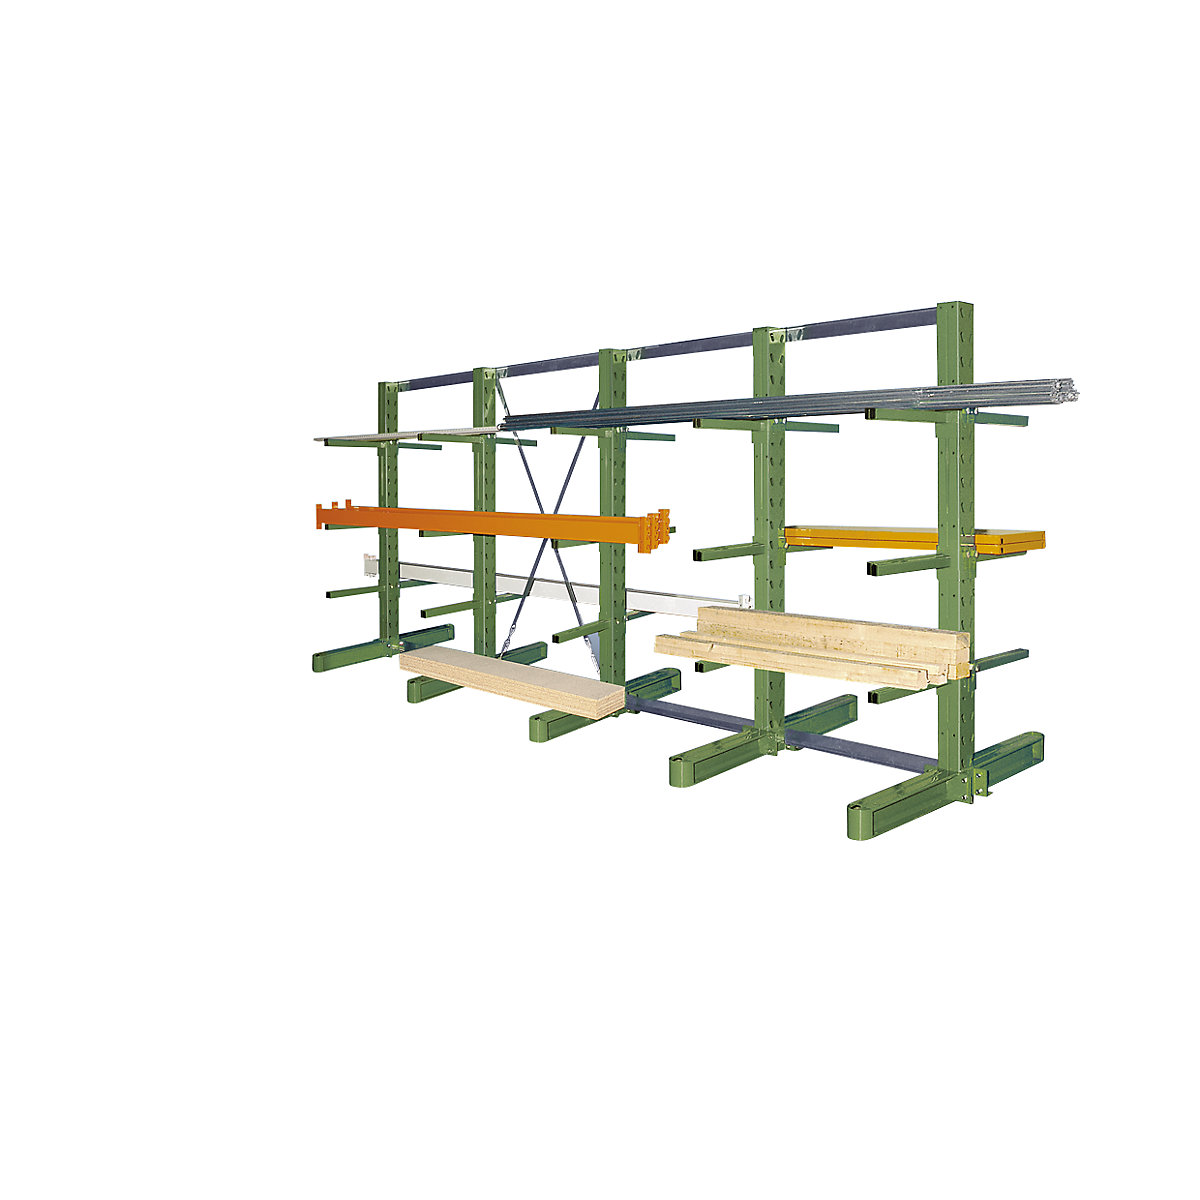 Complete cantilever racking unit, double sided – eurokraft pro, upright height 2700 mm, length 4100 mm, depth 2 x 400 mm, green-1